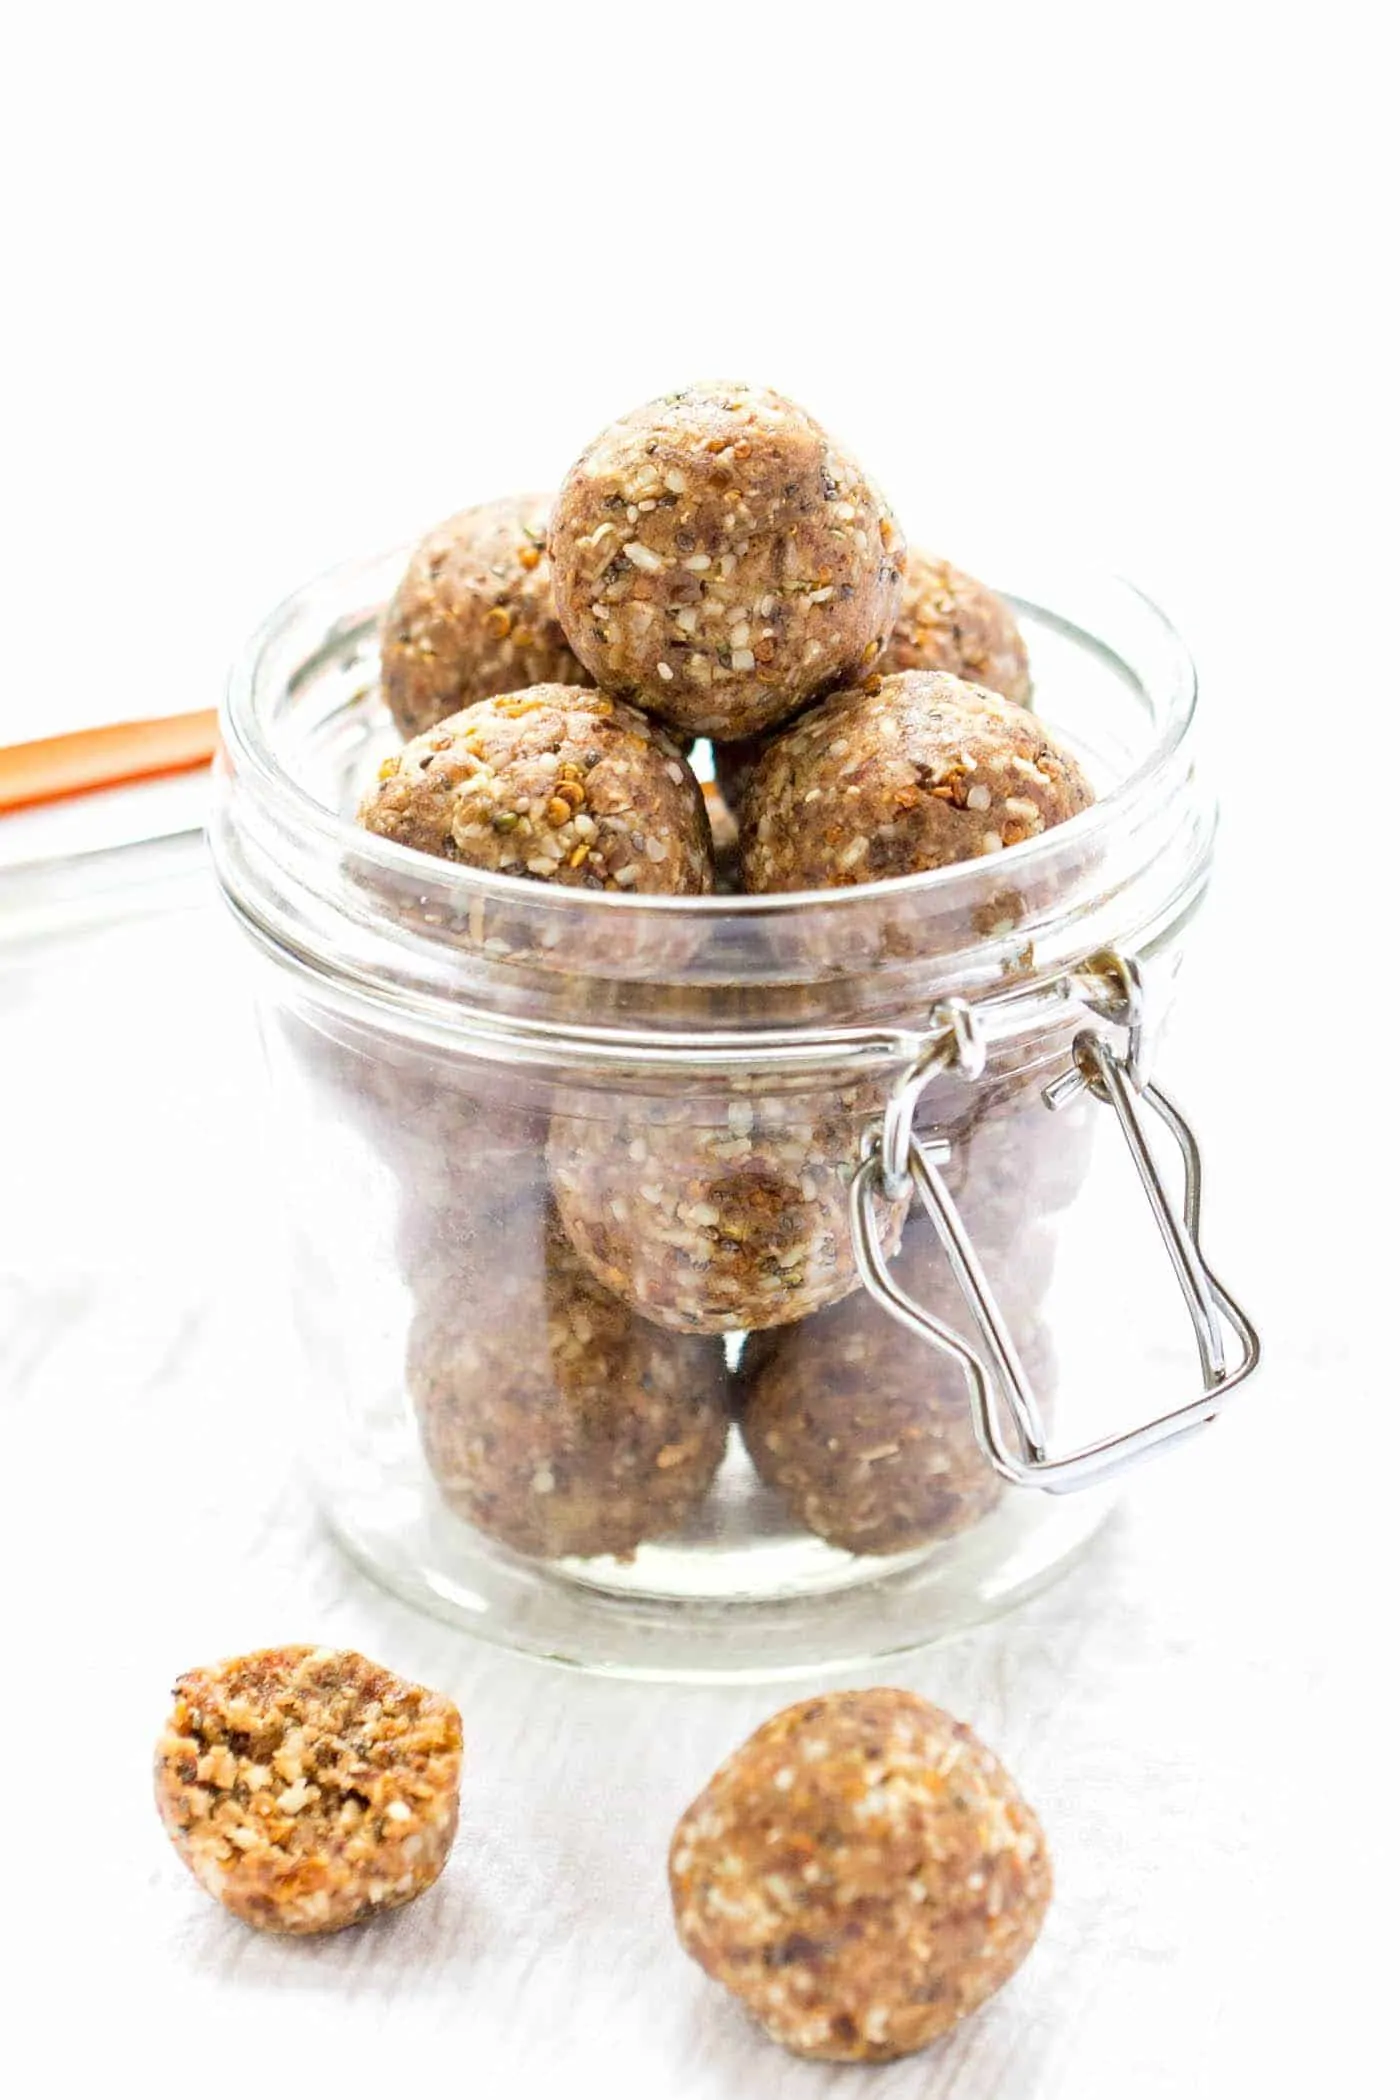 Super easy PROTEIN quinoa energy bites in a coconut-chai flavor. Perfect grab-and-go snack or for after a hard workout.